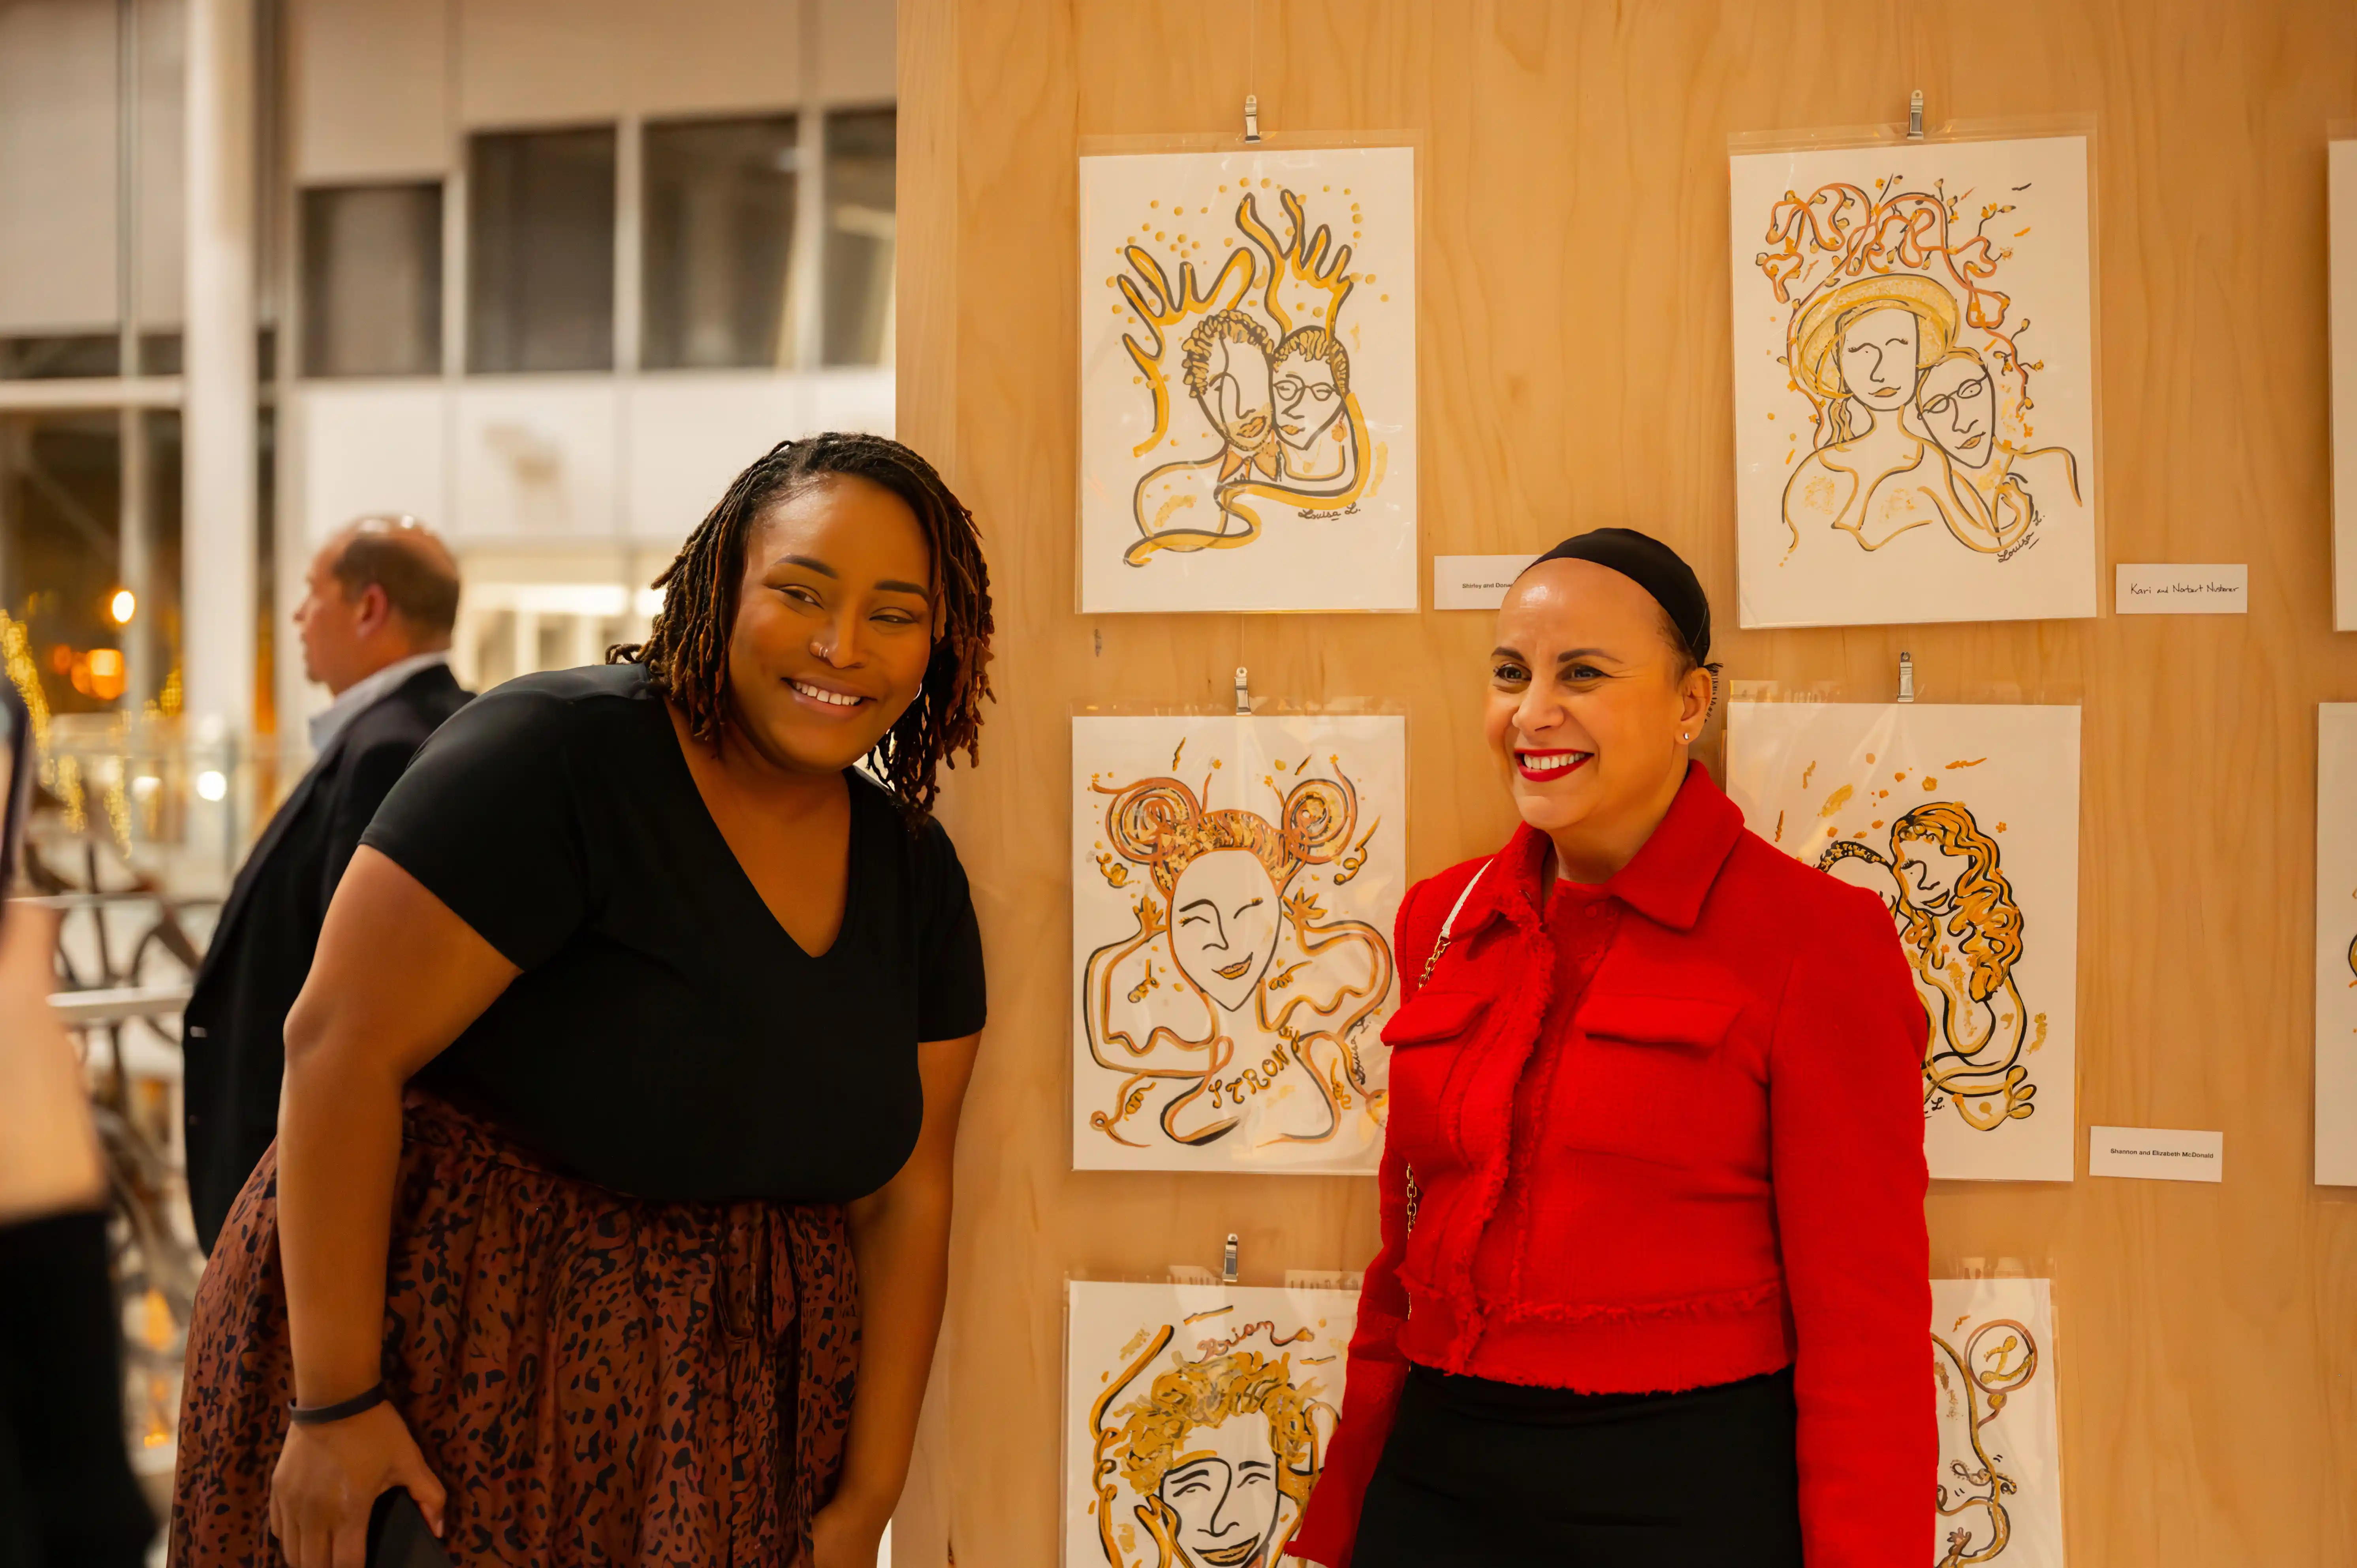 Two women smiling at an art exhibition with drawings displayed on the wall behind them.